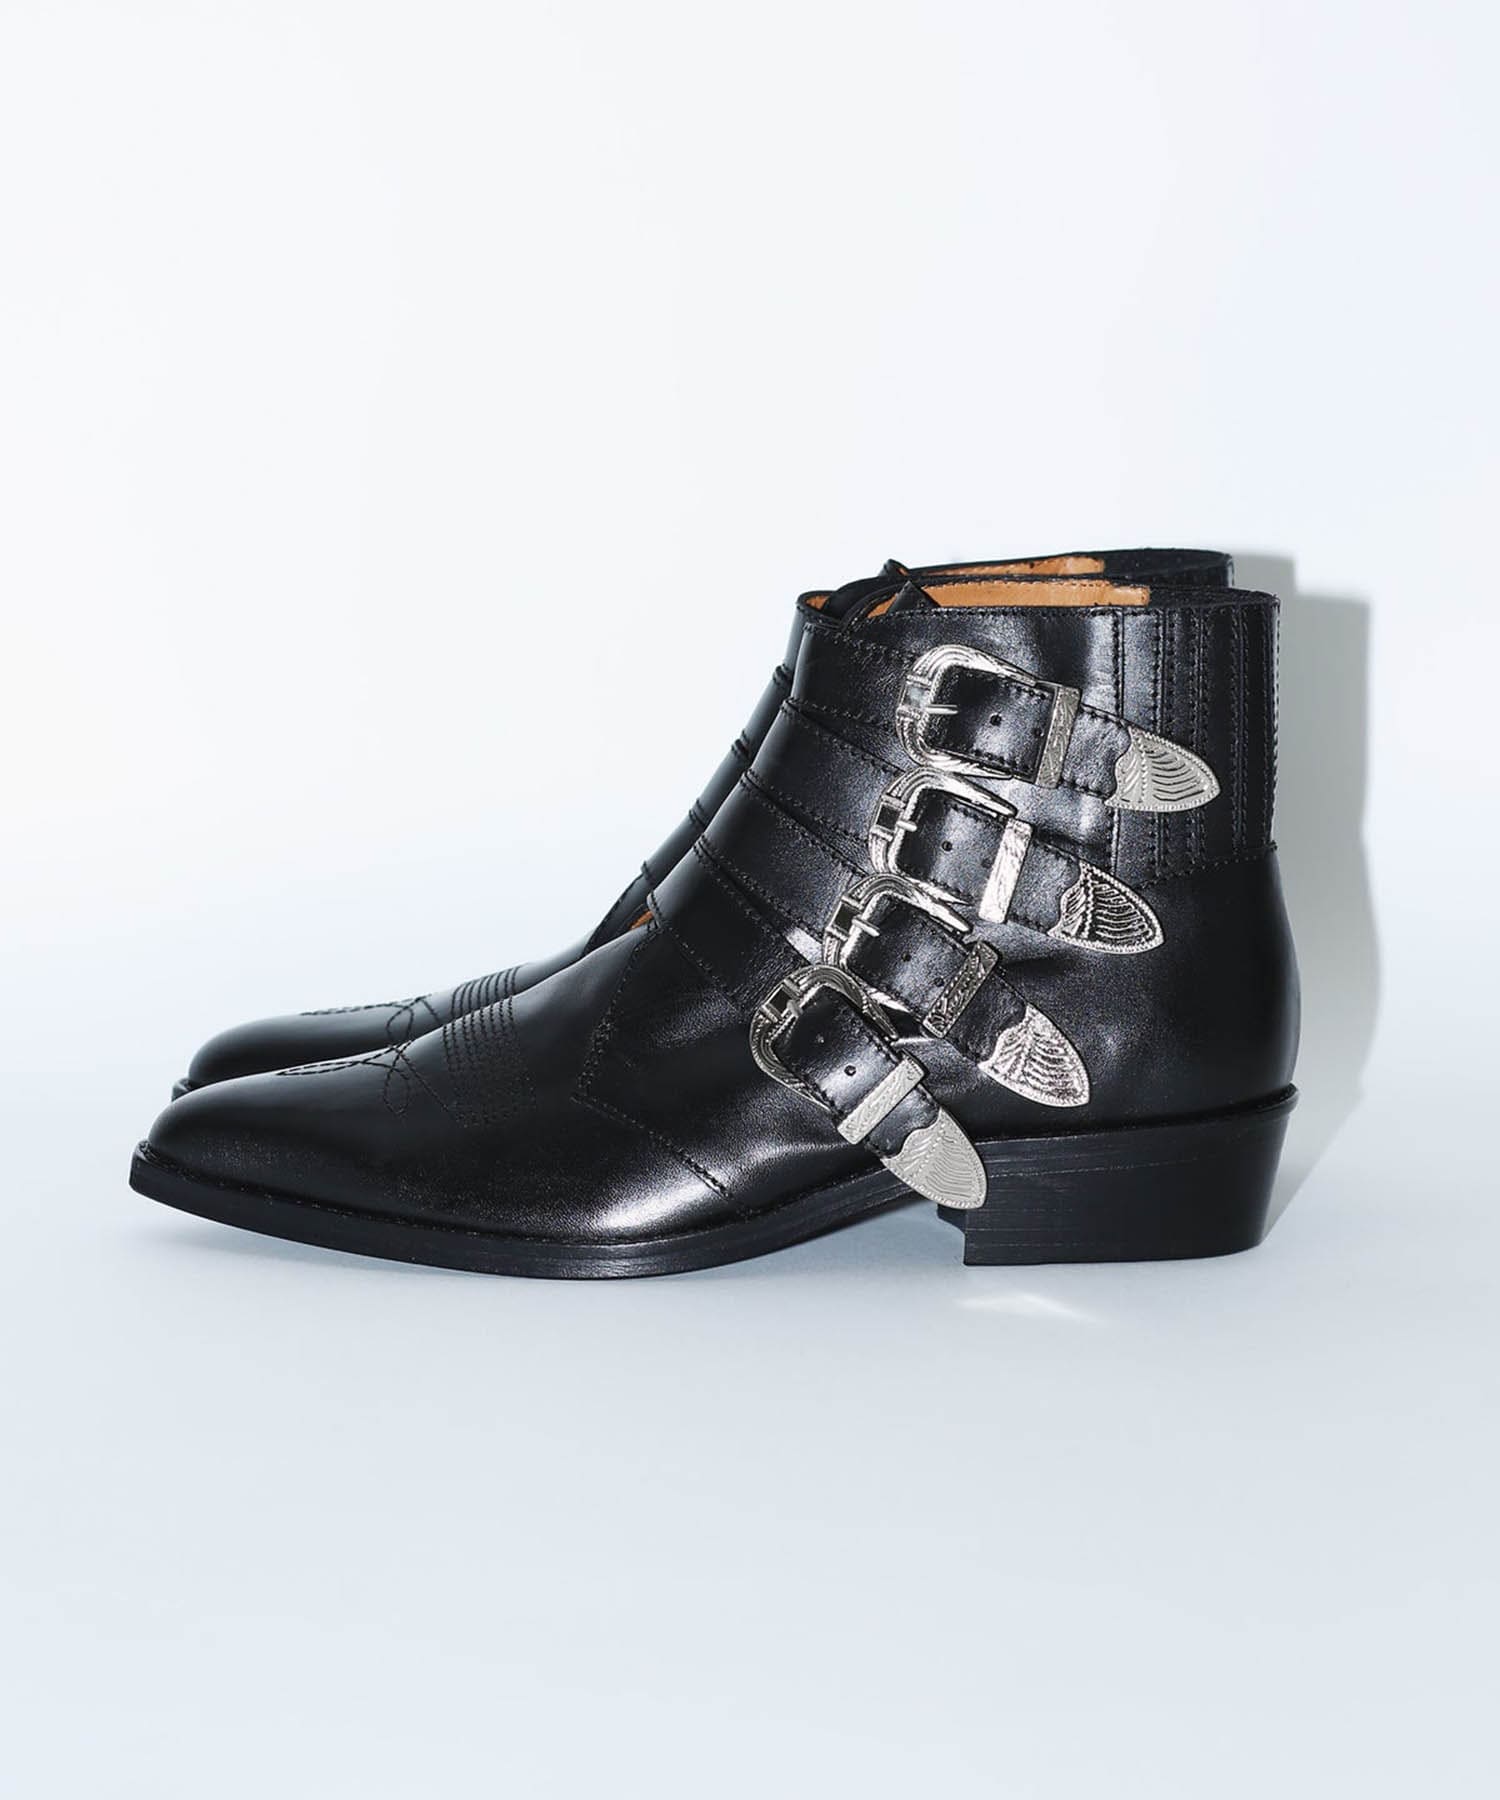 TOGA VIRILIS（トーガ ビリリース）の「LEATHER SILVER BUCKLES BOOTS